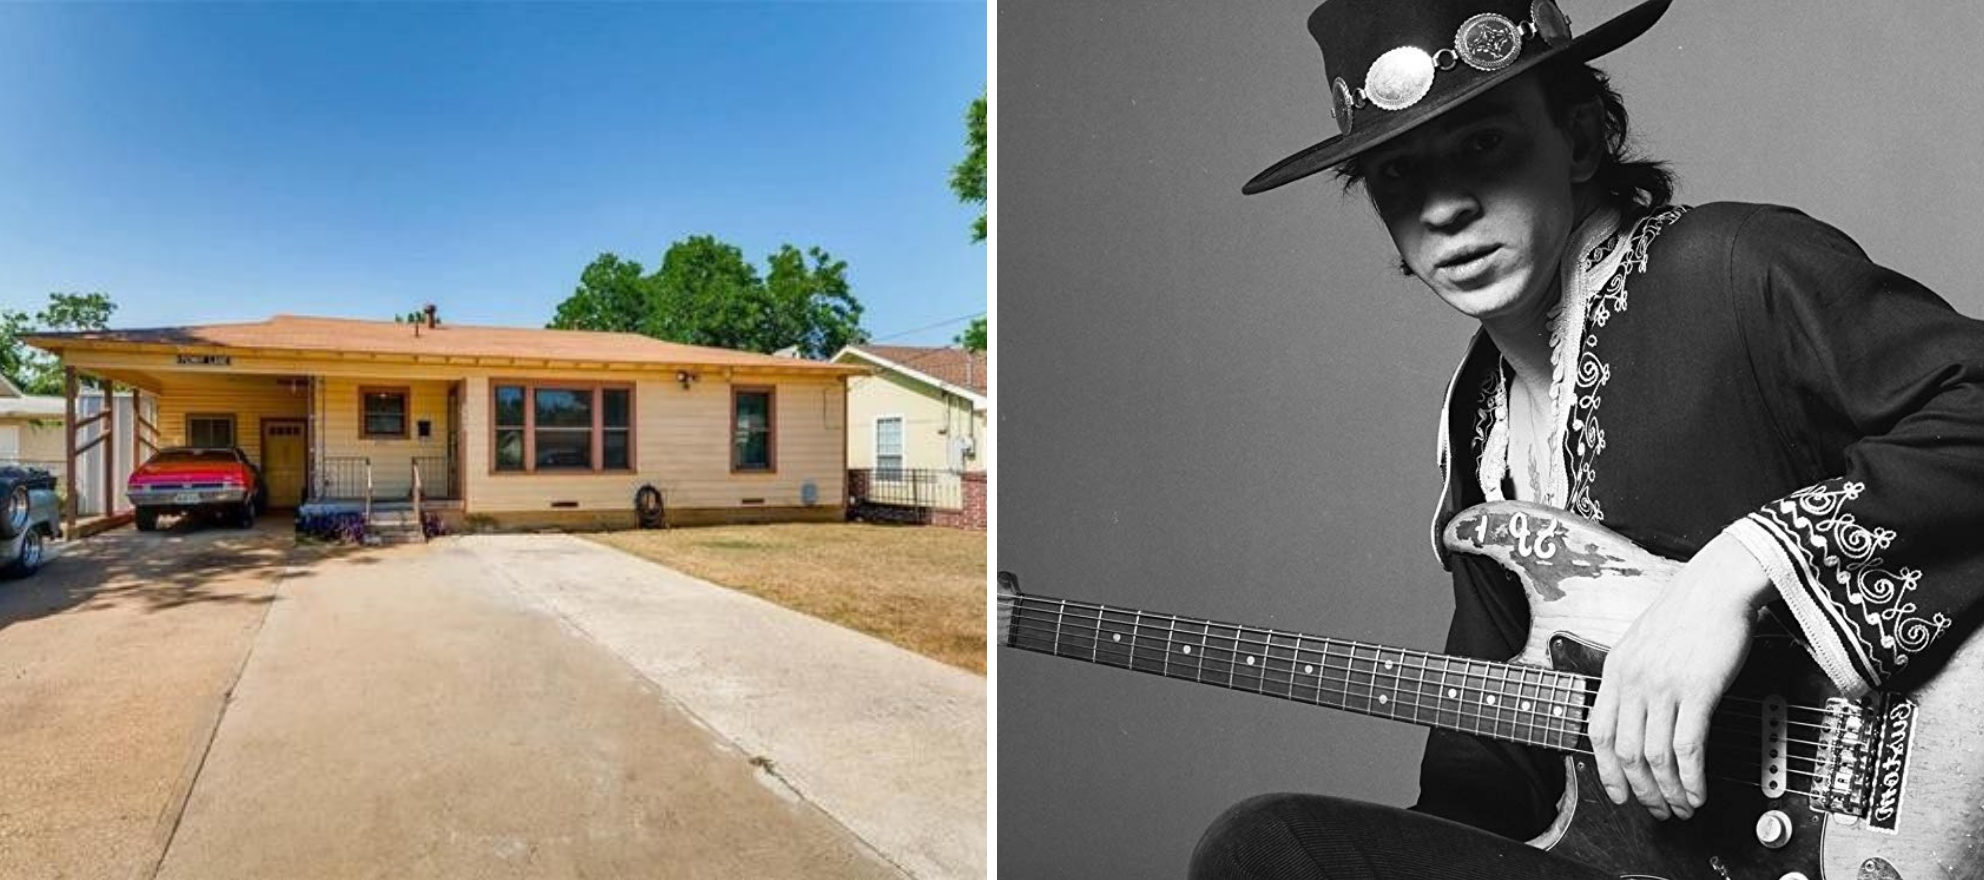 Stevie Ray Vaughan's childhood home sells for less than $160,000